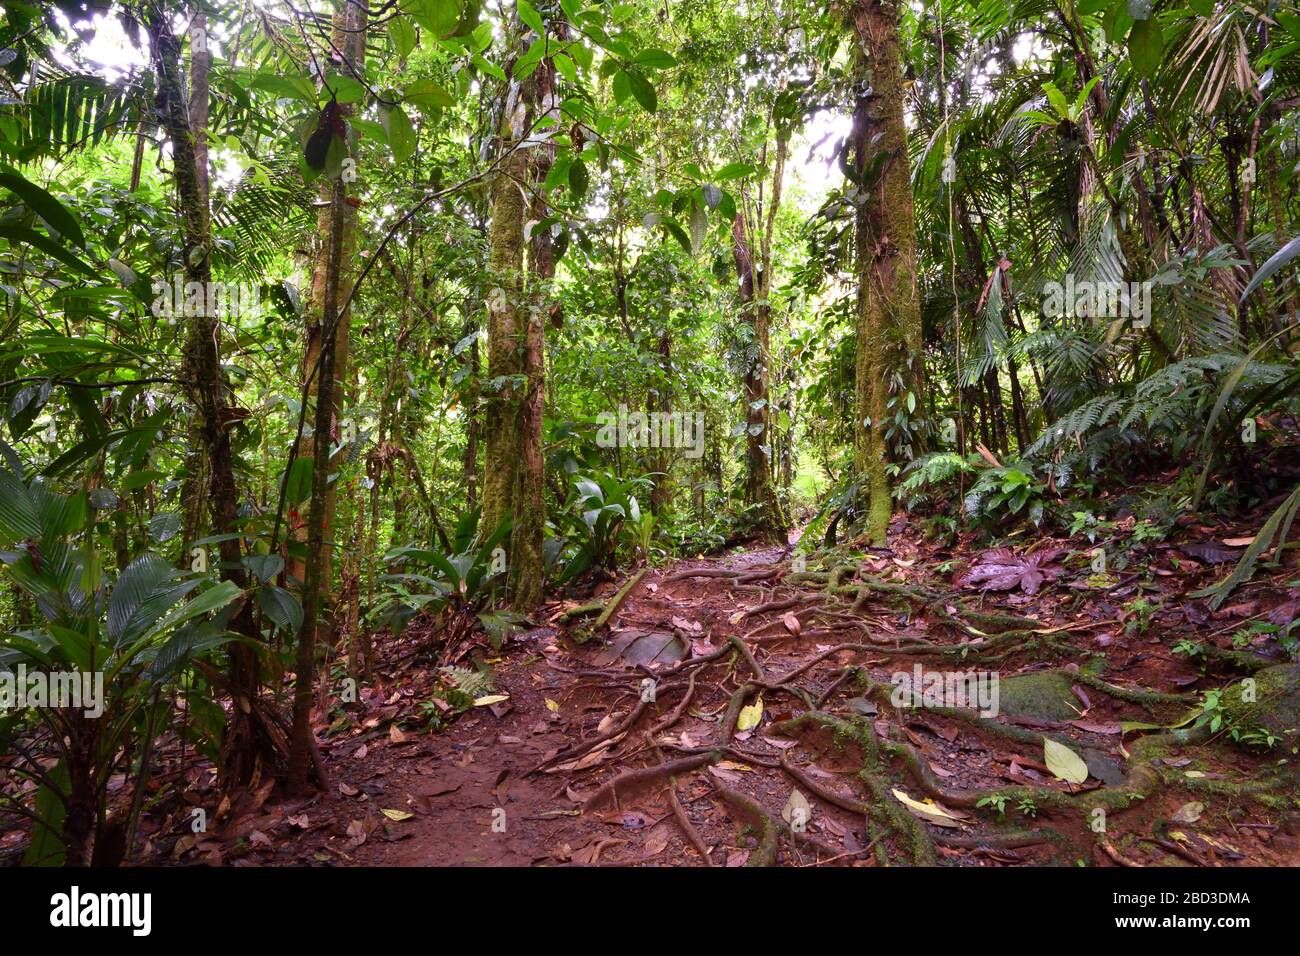 Old growth forest in Costa Rica Stock Photo